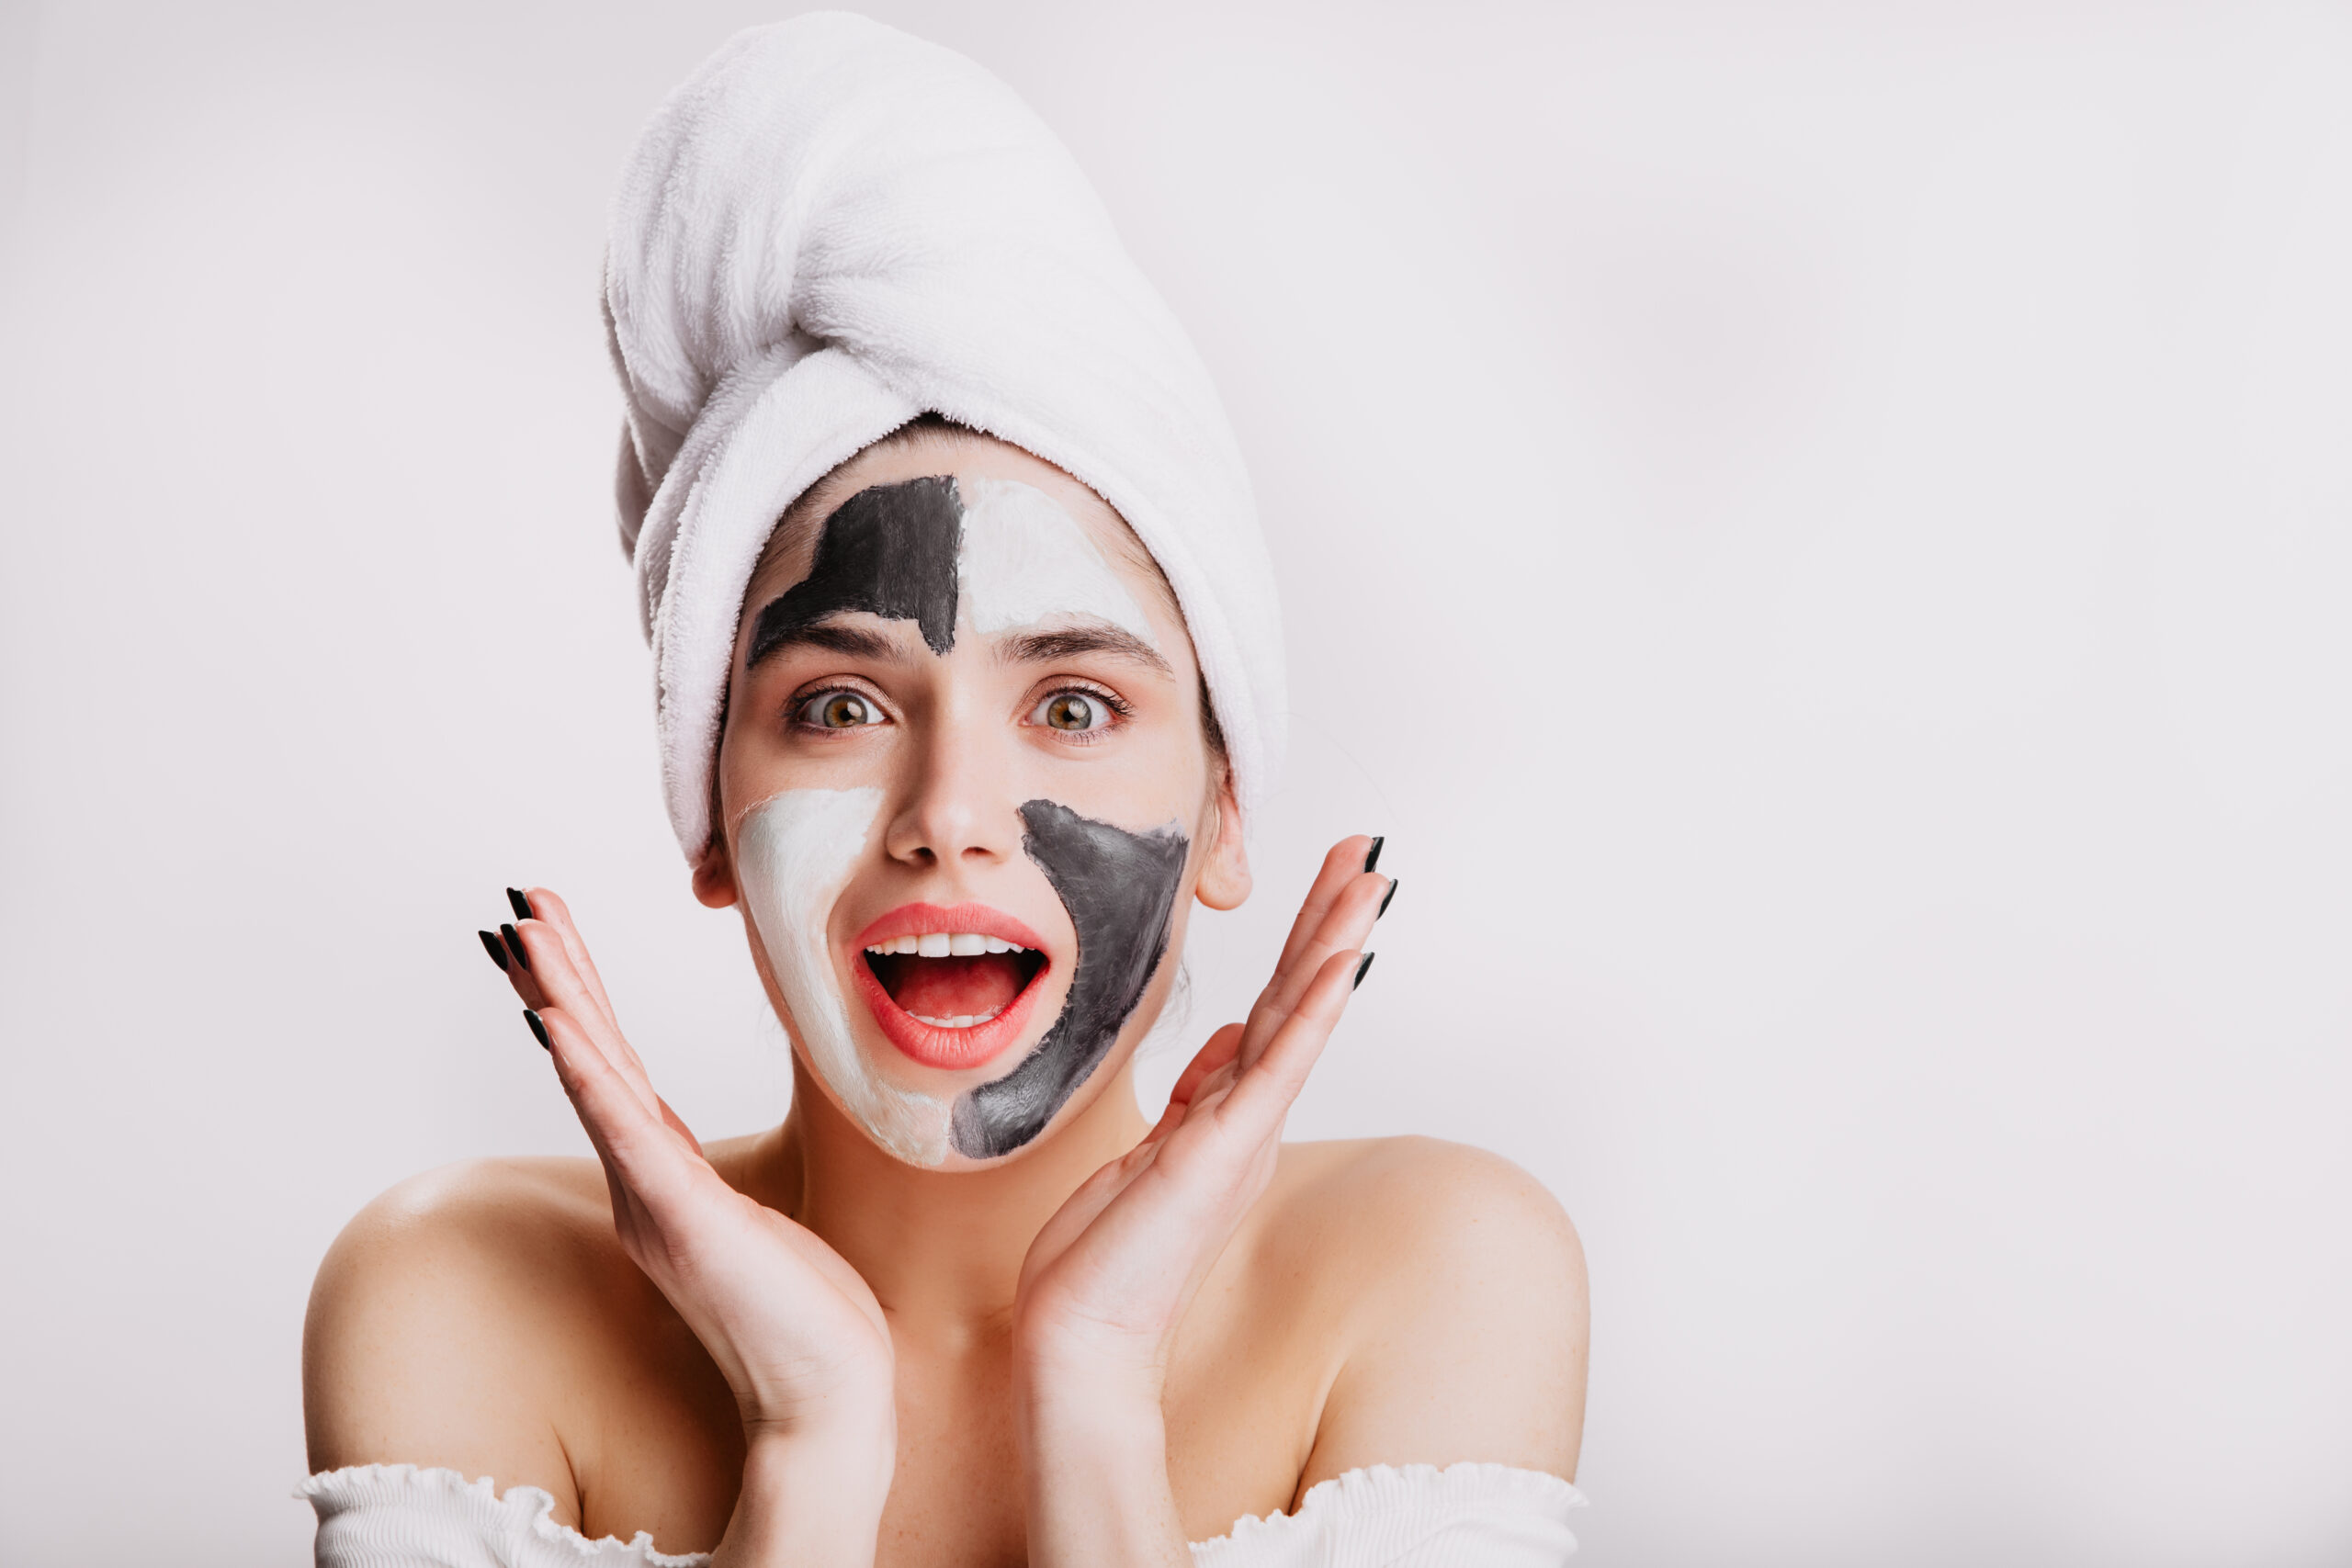 Joyful Girl With Face Mask Looks At Camera In Surprise Green Eyed Woman Posing On White Background After Washing Her Hair